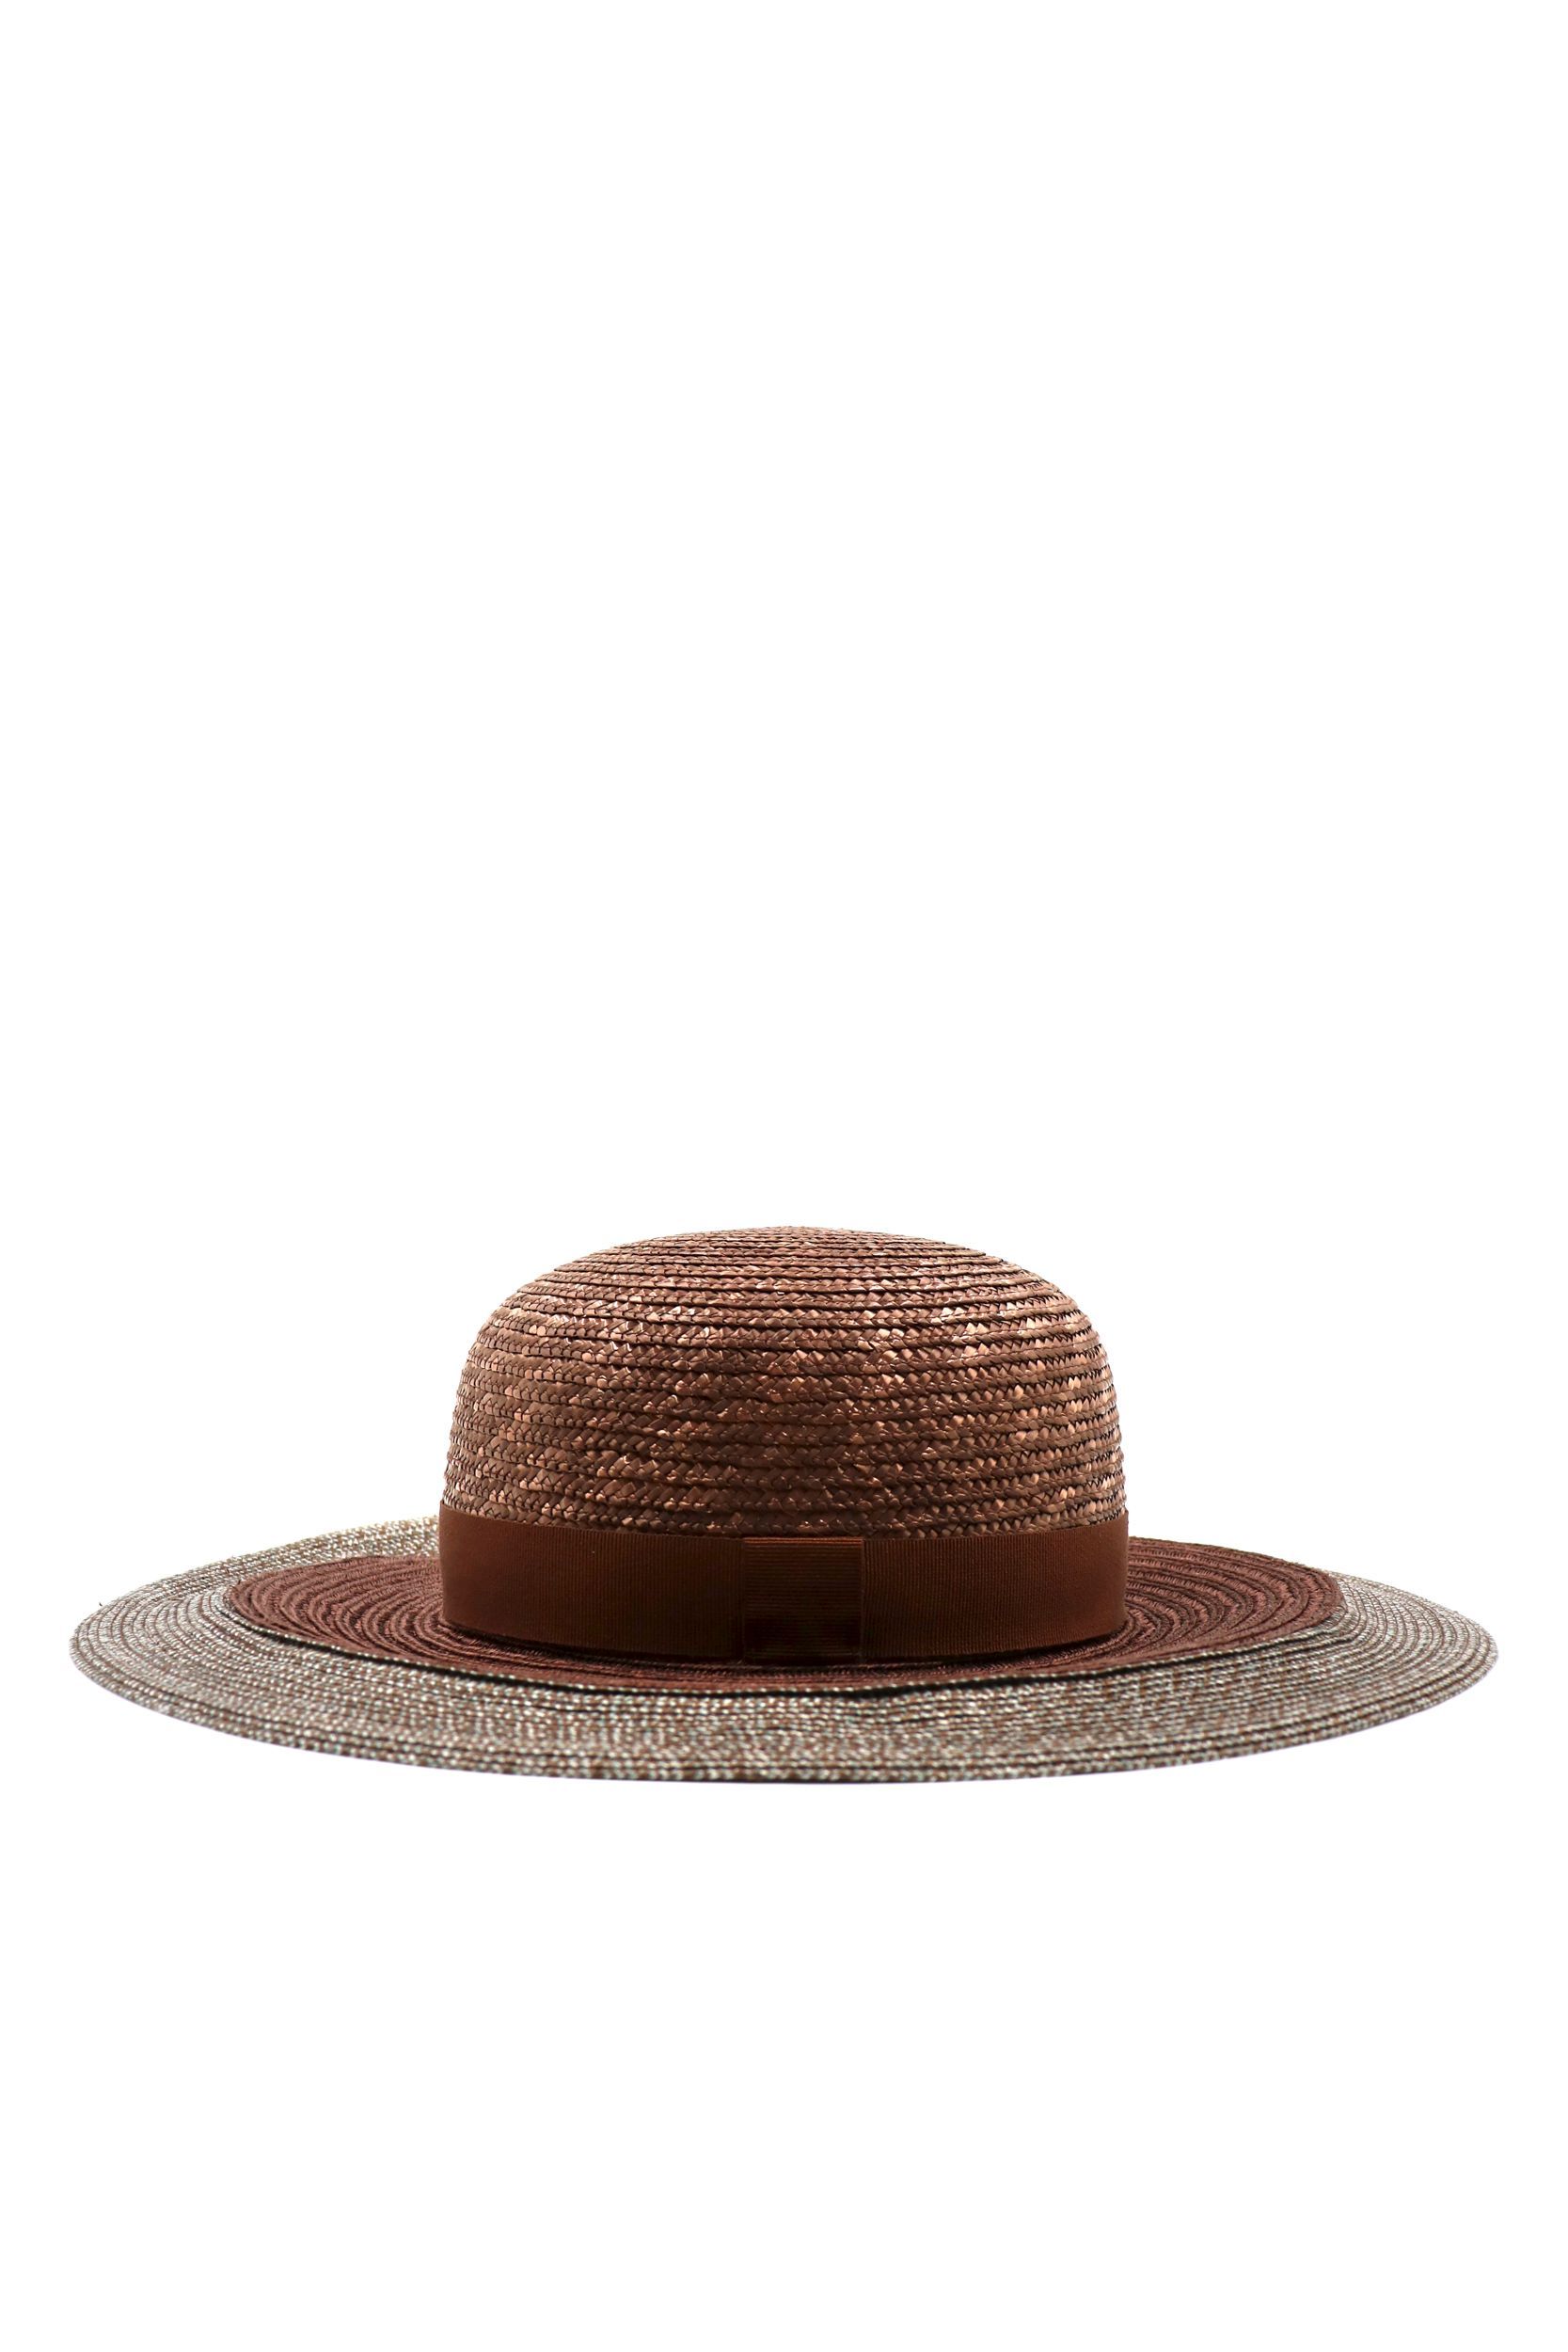 HAT ELEVENTY, OTHER MATERIALS 64%, LINEN 16%, CANVAS 10%, POLYESTER 10%, color BROWN, Model Name PAMELA, SS20, product code A80CPLA01TES0A15105